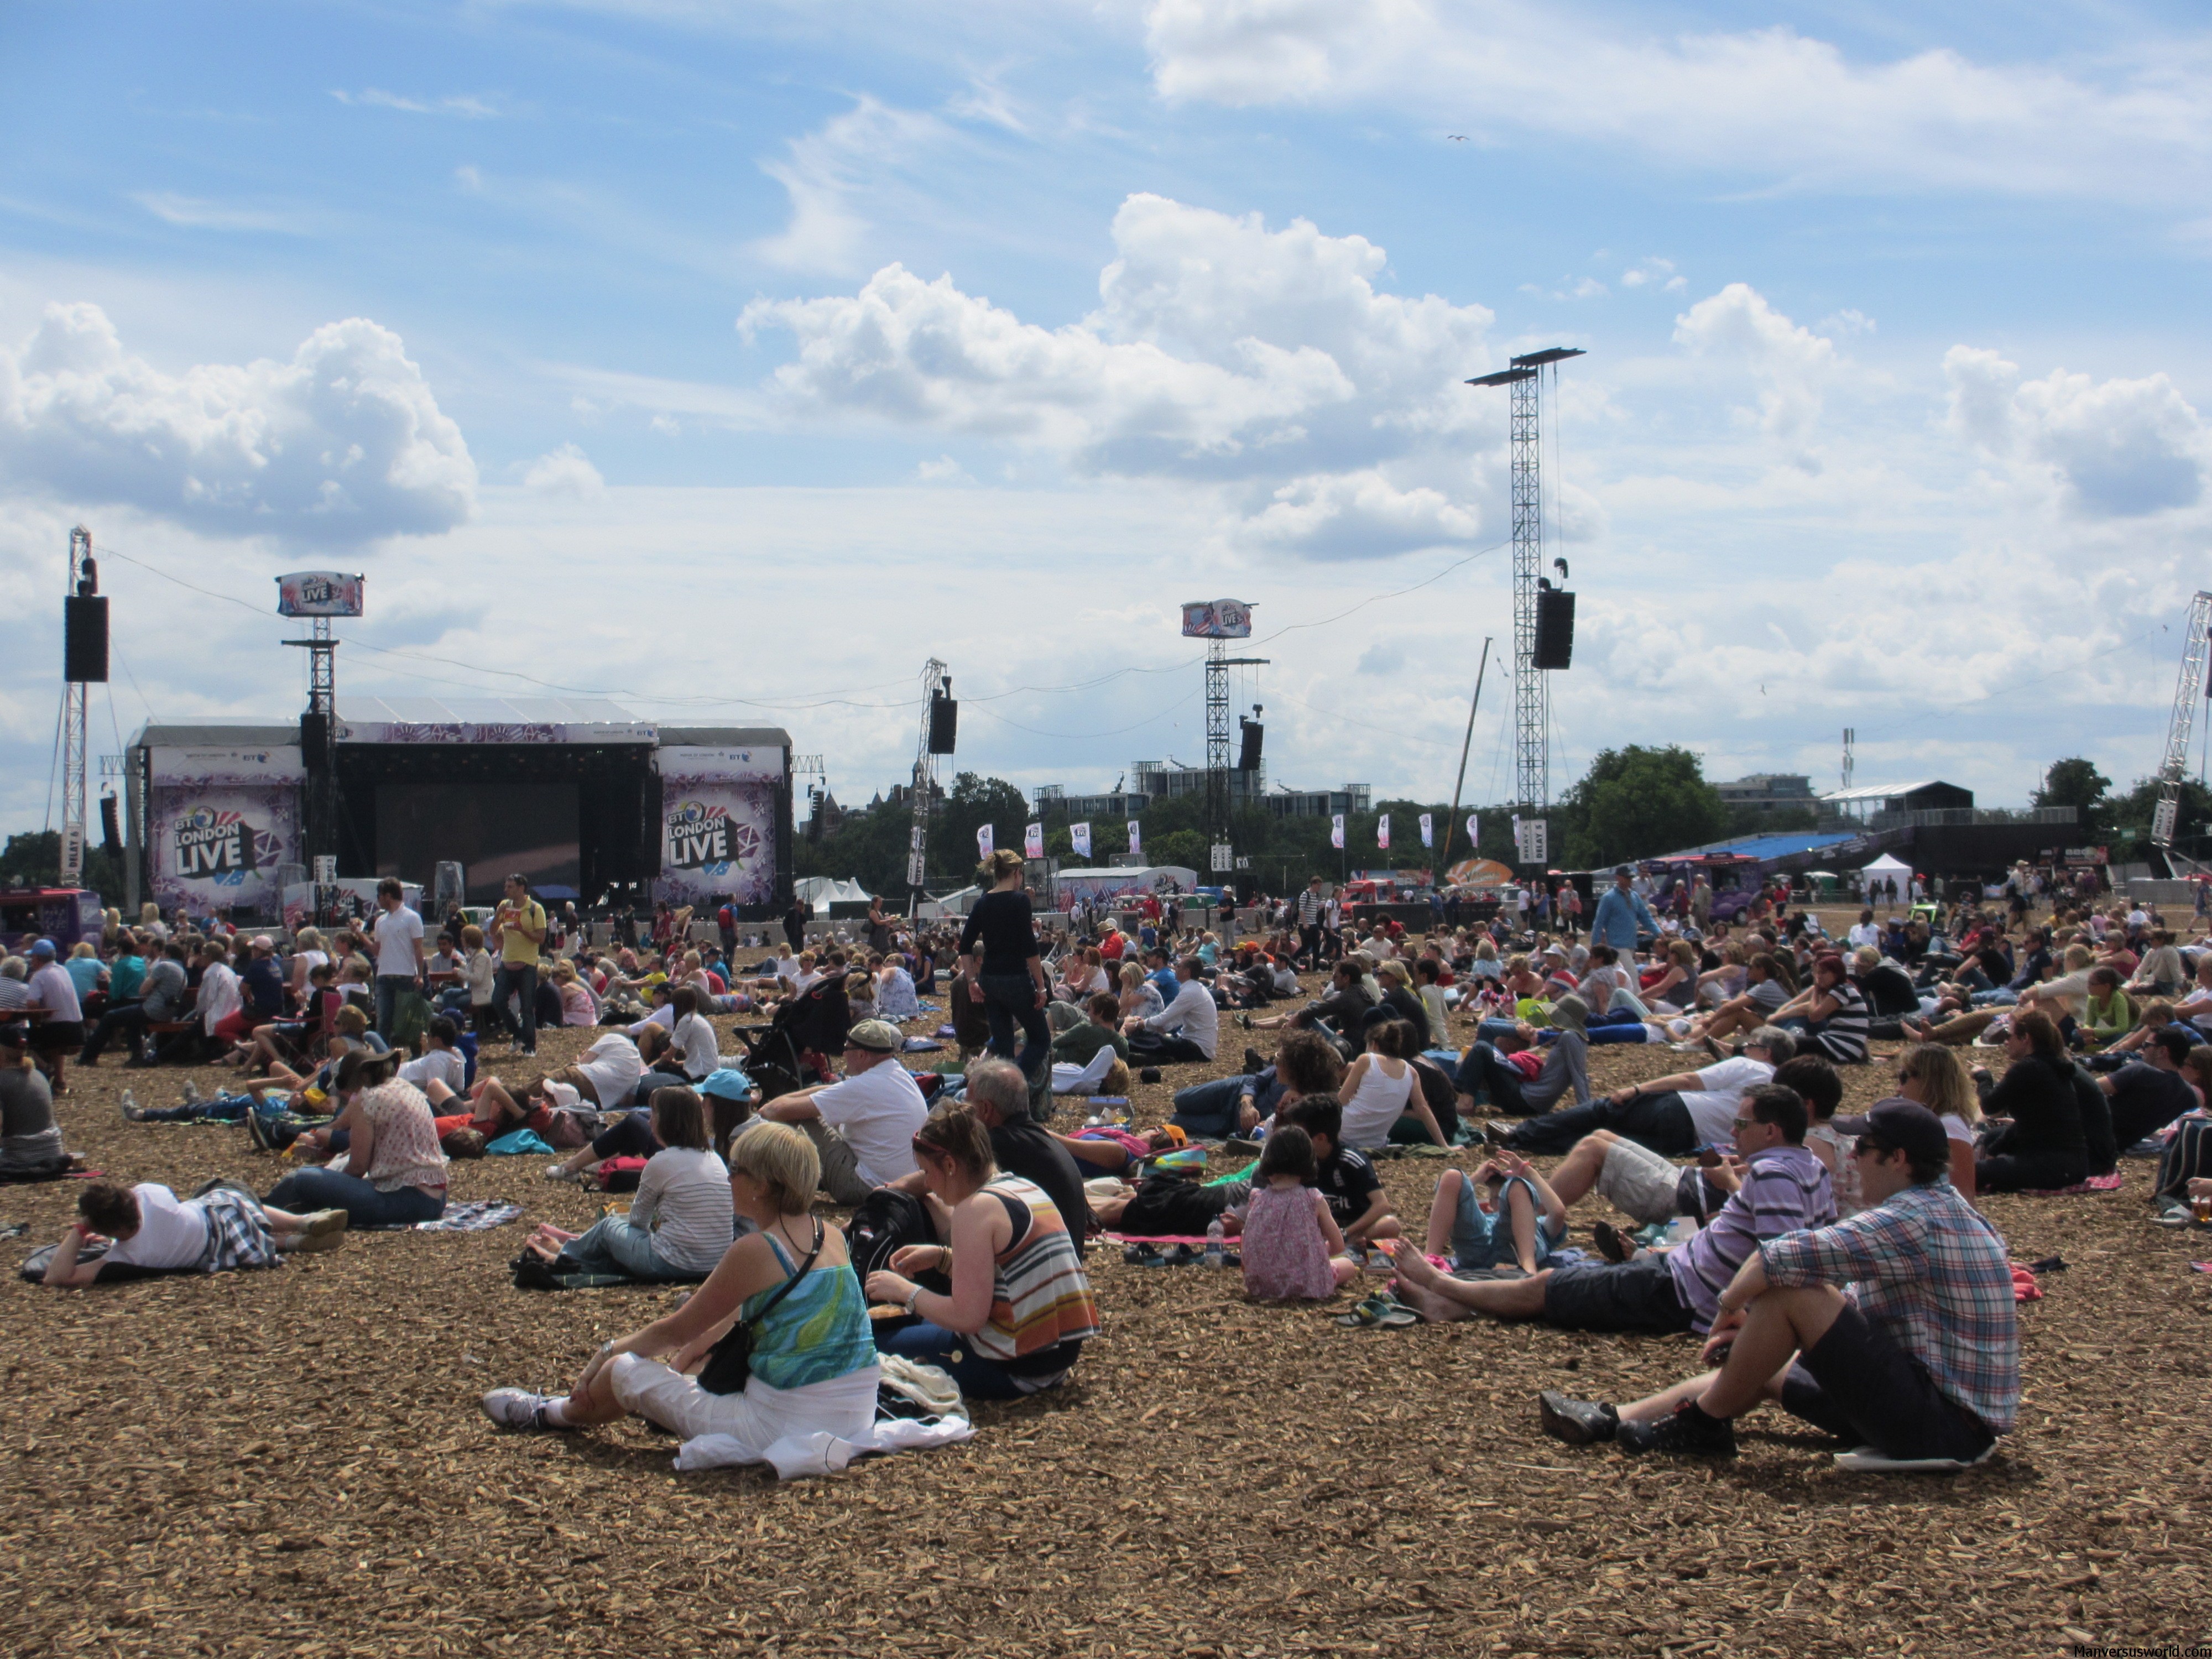 The crowd at London Live in Hyde Park